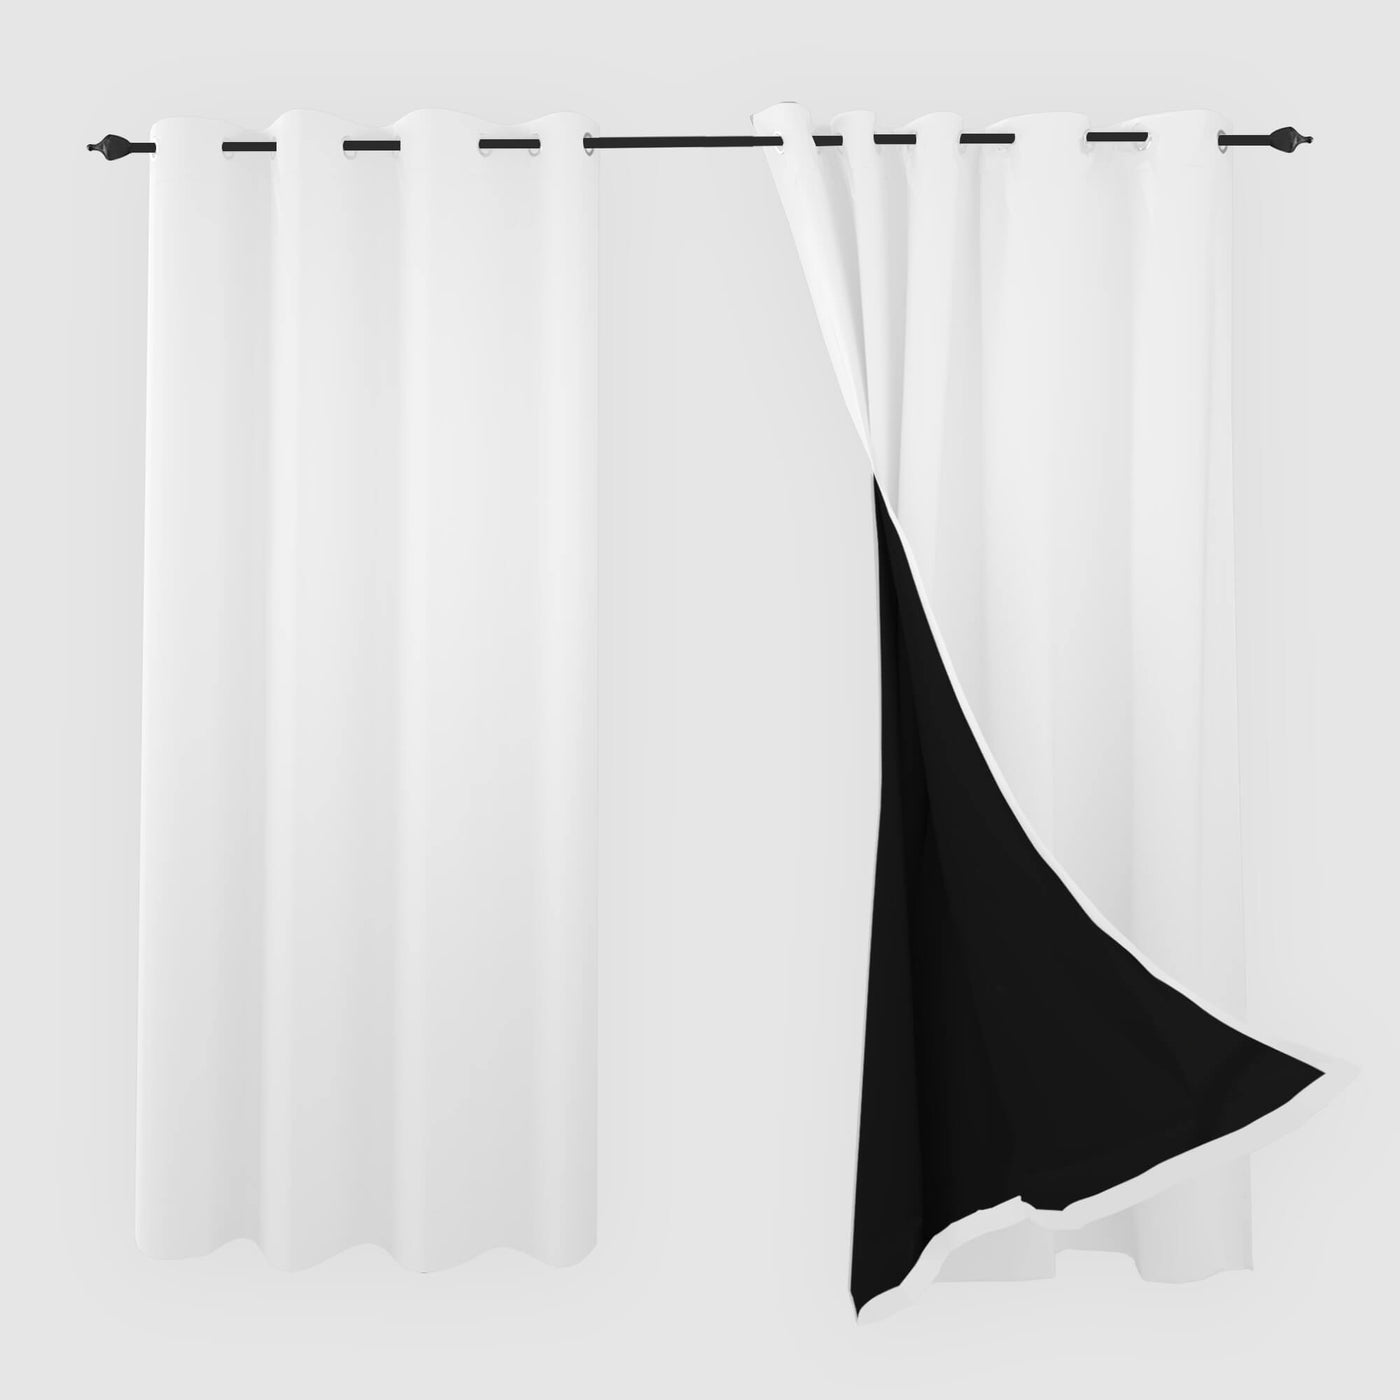 Heartcosy Blackout Curtains White - Grommet Top